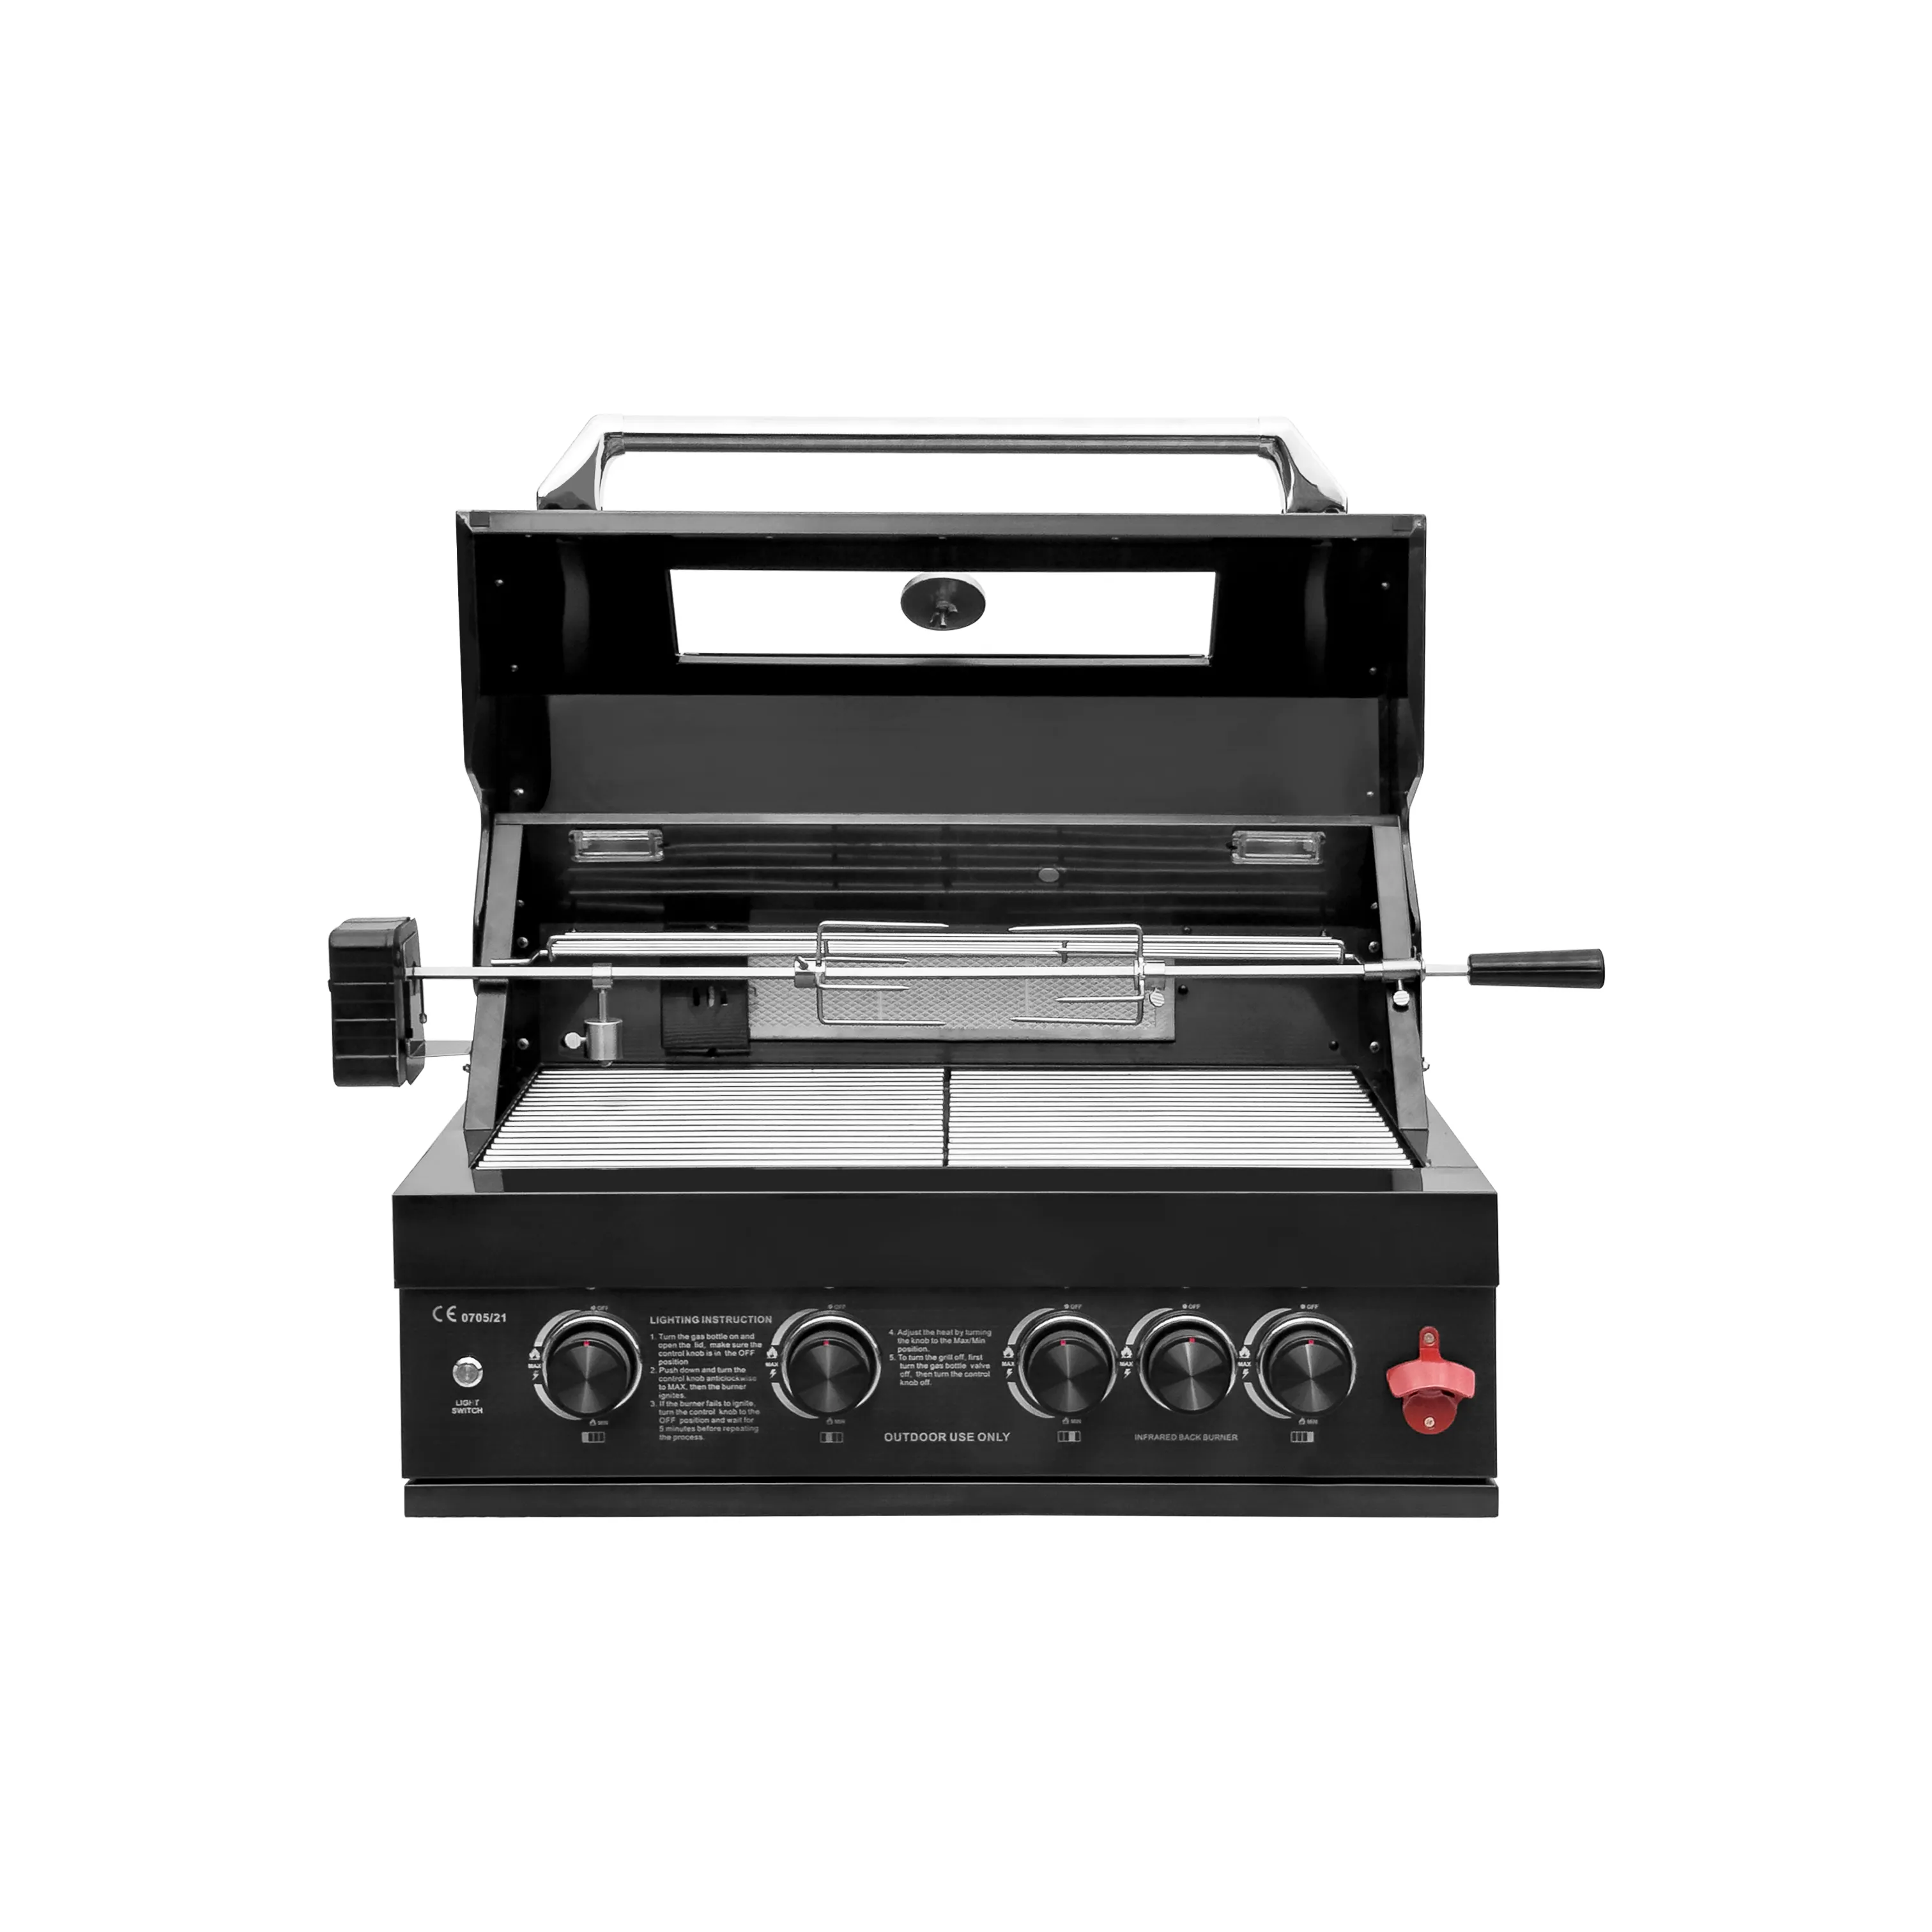 Black Designs Bbq Gaz Cooking Grill Gas Built In Gas Barbecue Grill Outdoor